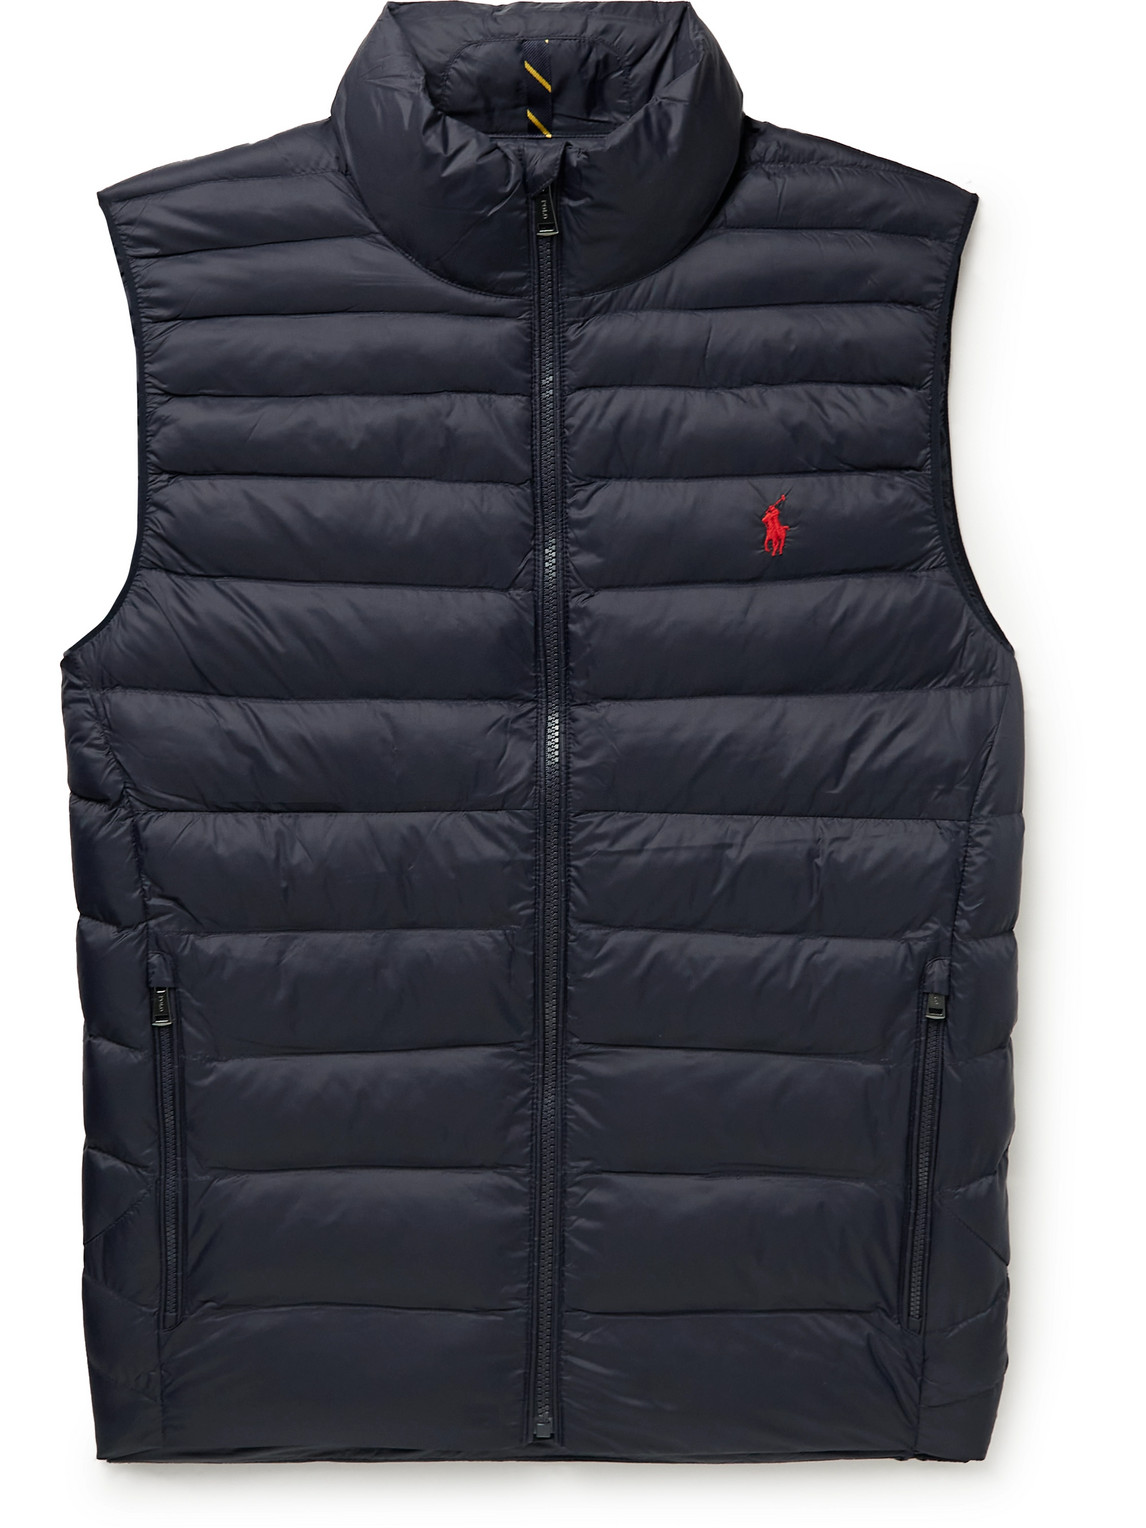 POLO RALPH LAUREN QUILTED RECYCLED NYLON PRIMALOFT GILET